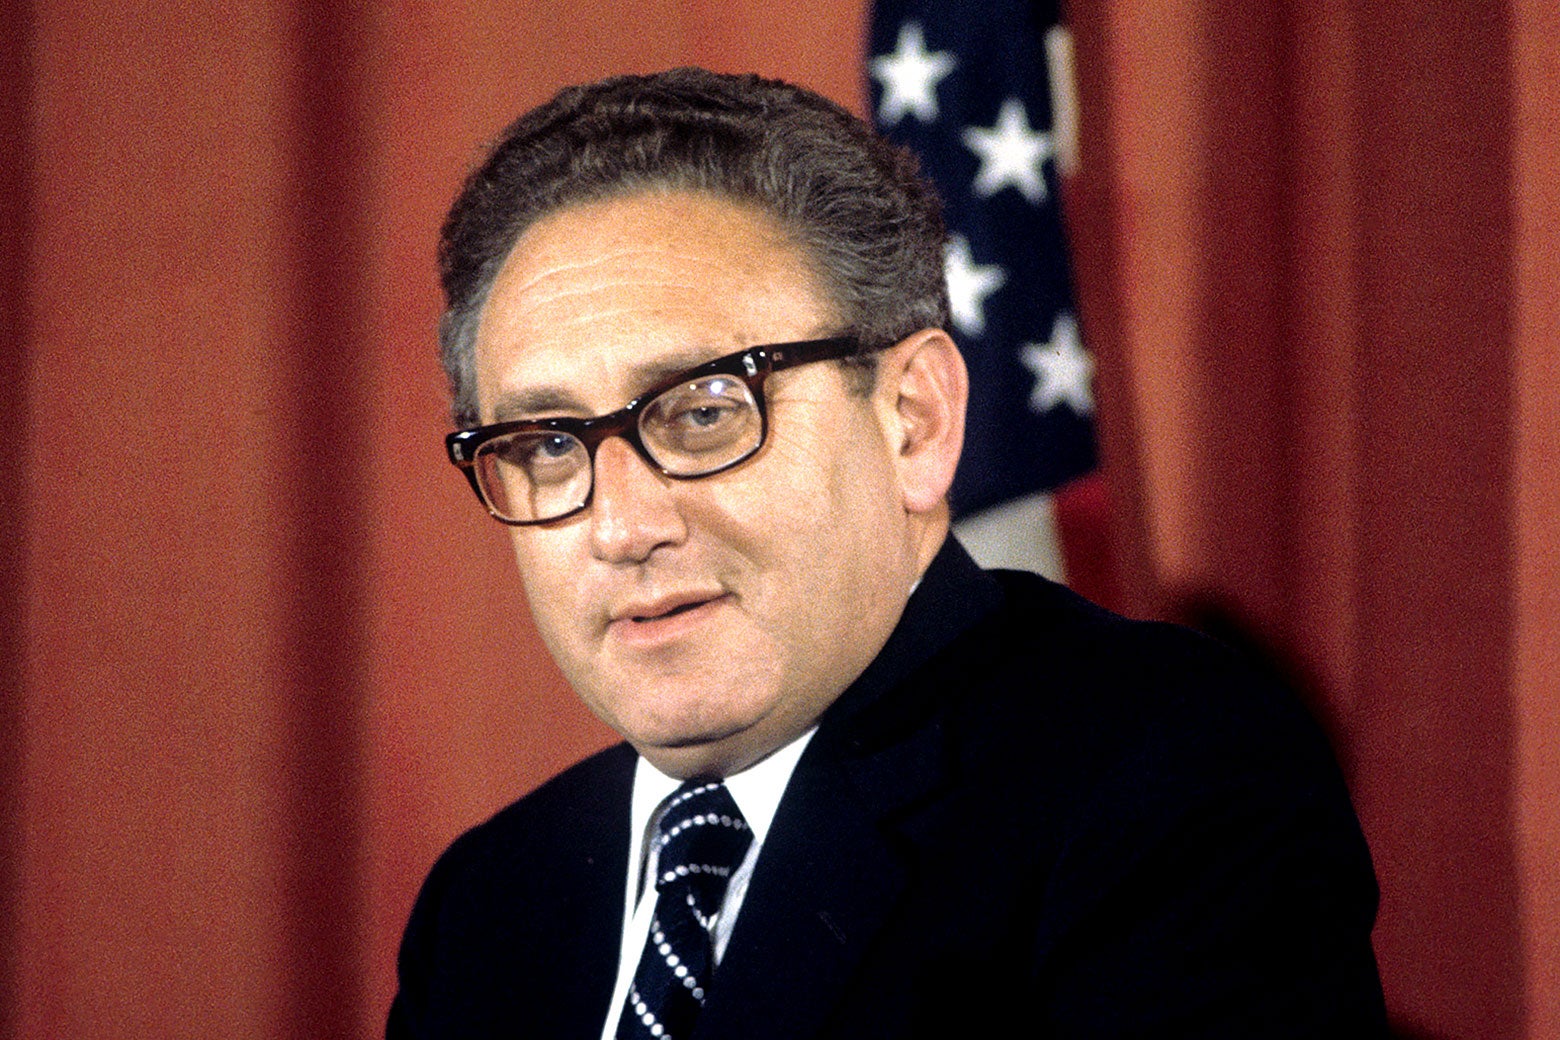 Kissinger in a black suit and tie smirking.